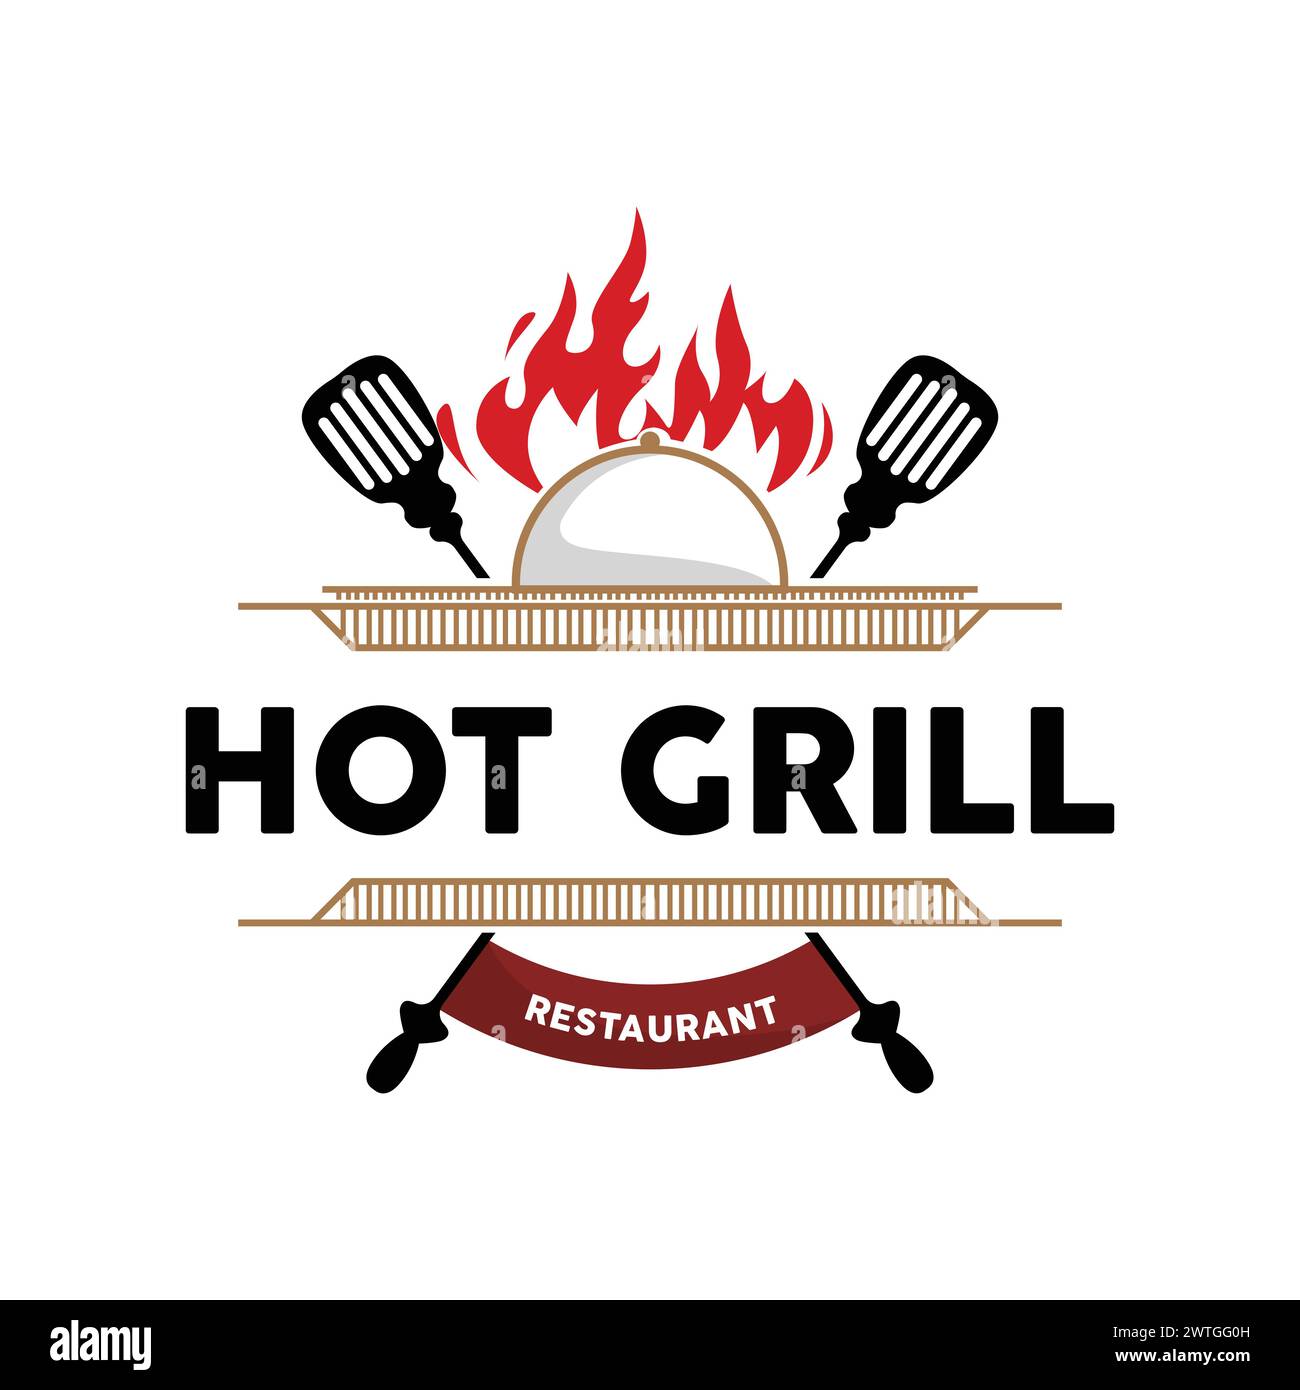 Barbeque Logo, Hot Grill Design With Fire And Spatula, Vector BBQ Grill Vintage Tripography, Retro Rustic Logo For Cafe, Restaurant, Bar Stock Vector